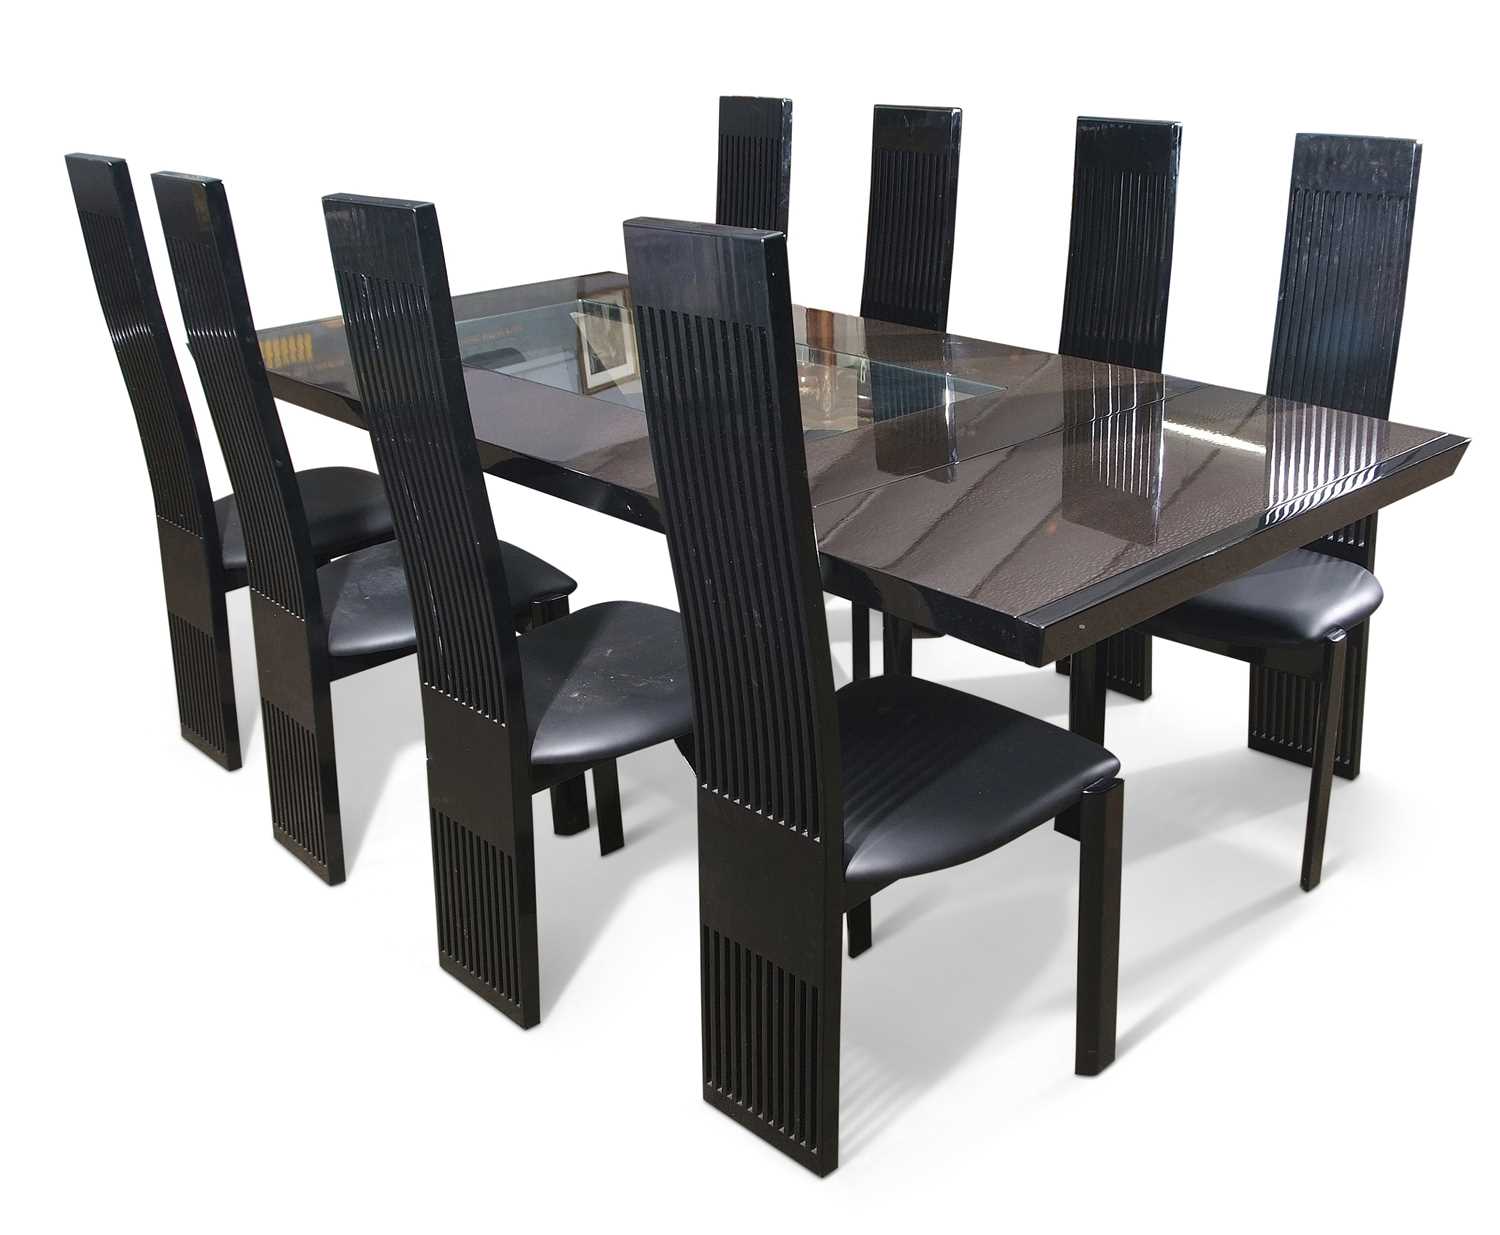 Constantini Pietro, contemporary rectangular dining table with inset glass centre together with